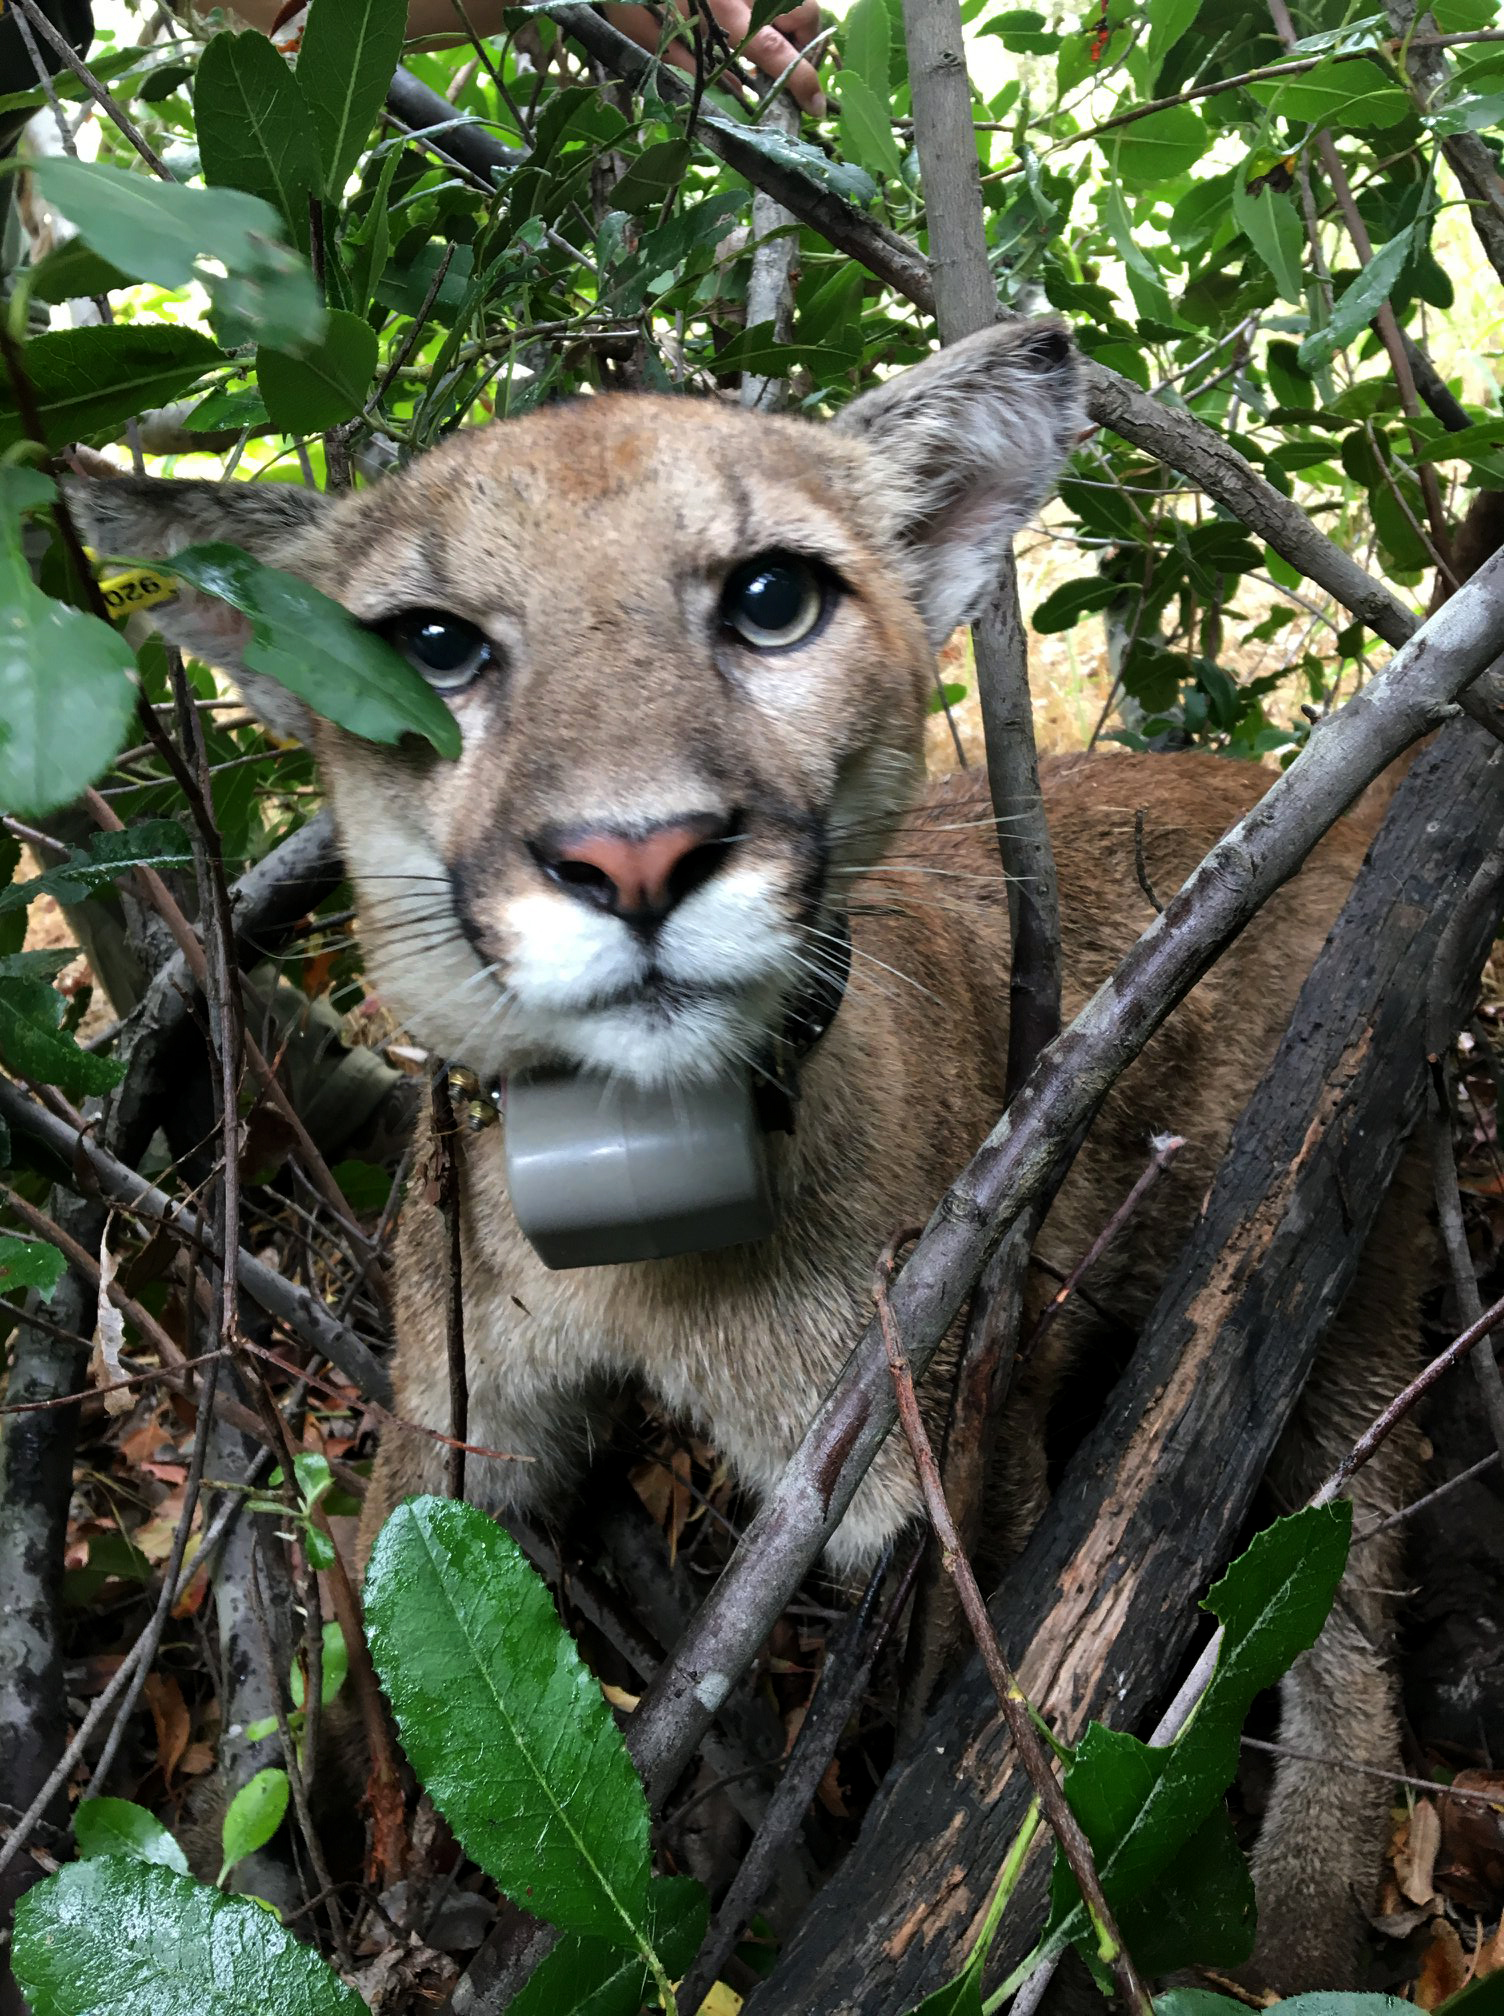 PHOTO: Officers from the California Department of Fish and Wildlife have tagged a mountain lion they found in a tree in the Pacific Palisades.